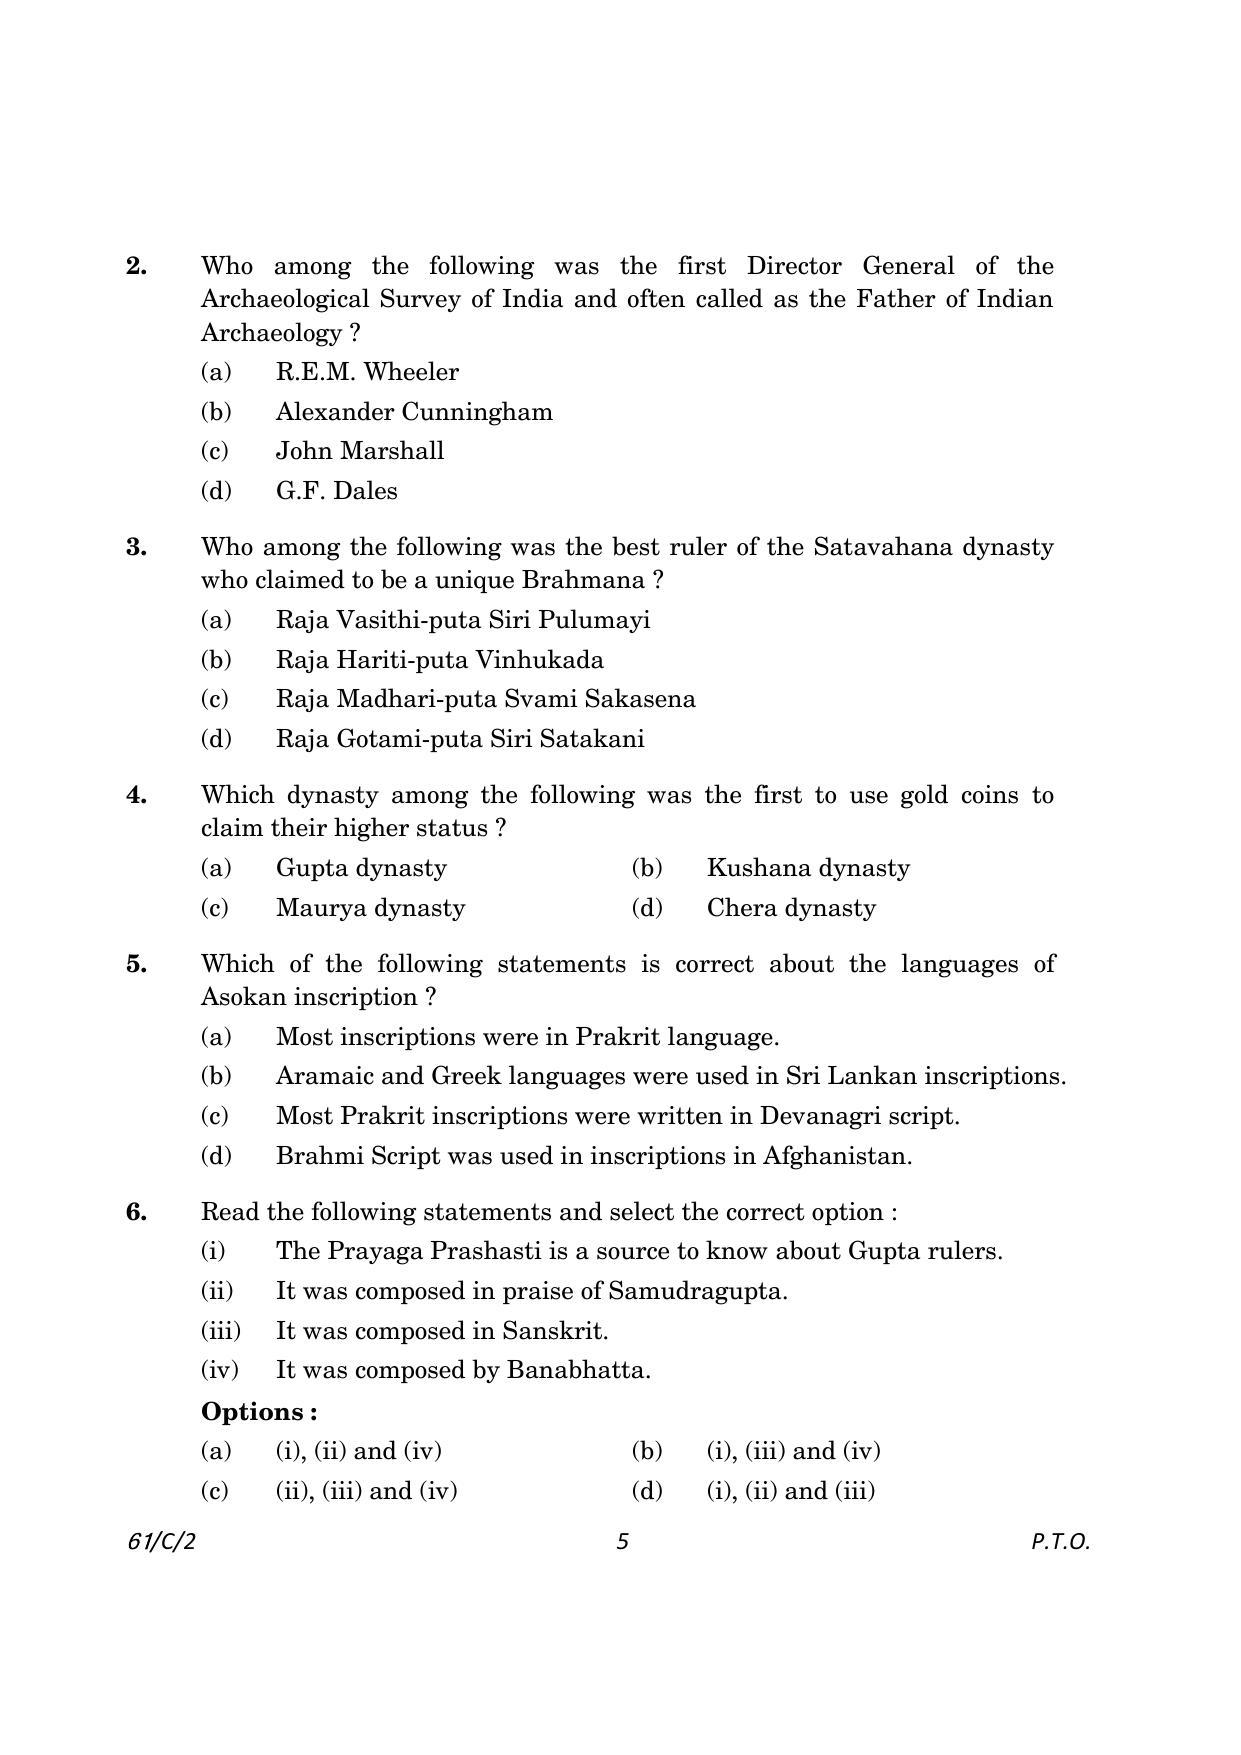 CBSE Class 12 61-2 History 2023 (Compartment) Question Paper - Page 5